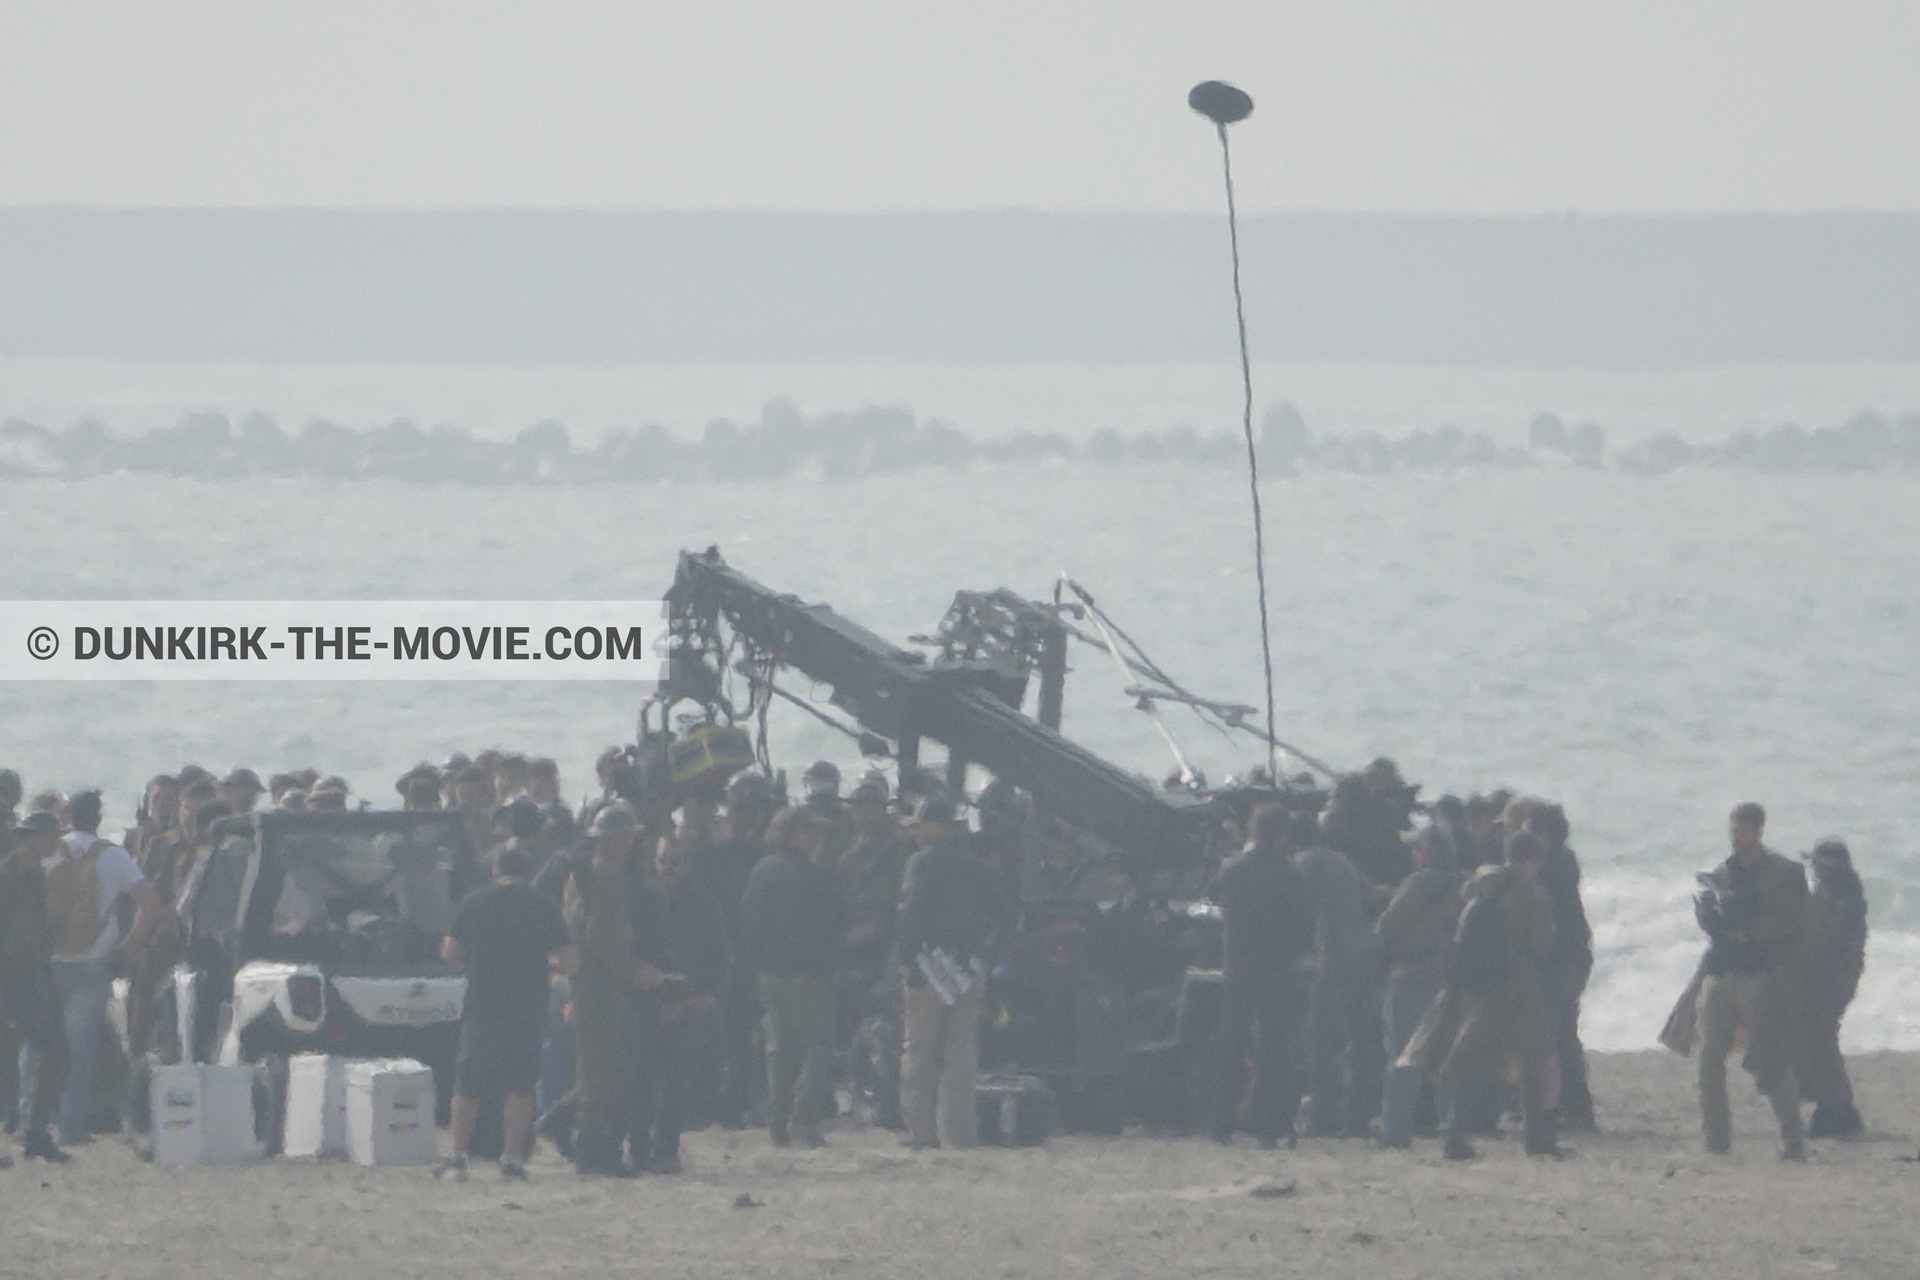 Picture with supernumeraries, beach, technical team,  from behind the scene of the Dunkirk movie by Nolan